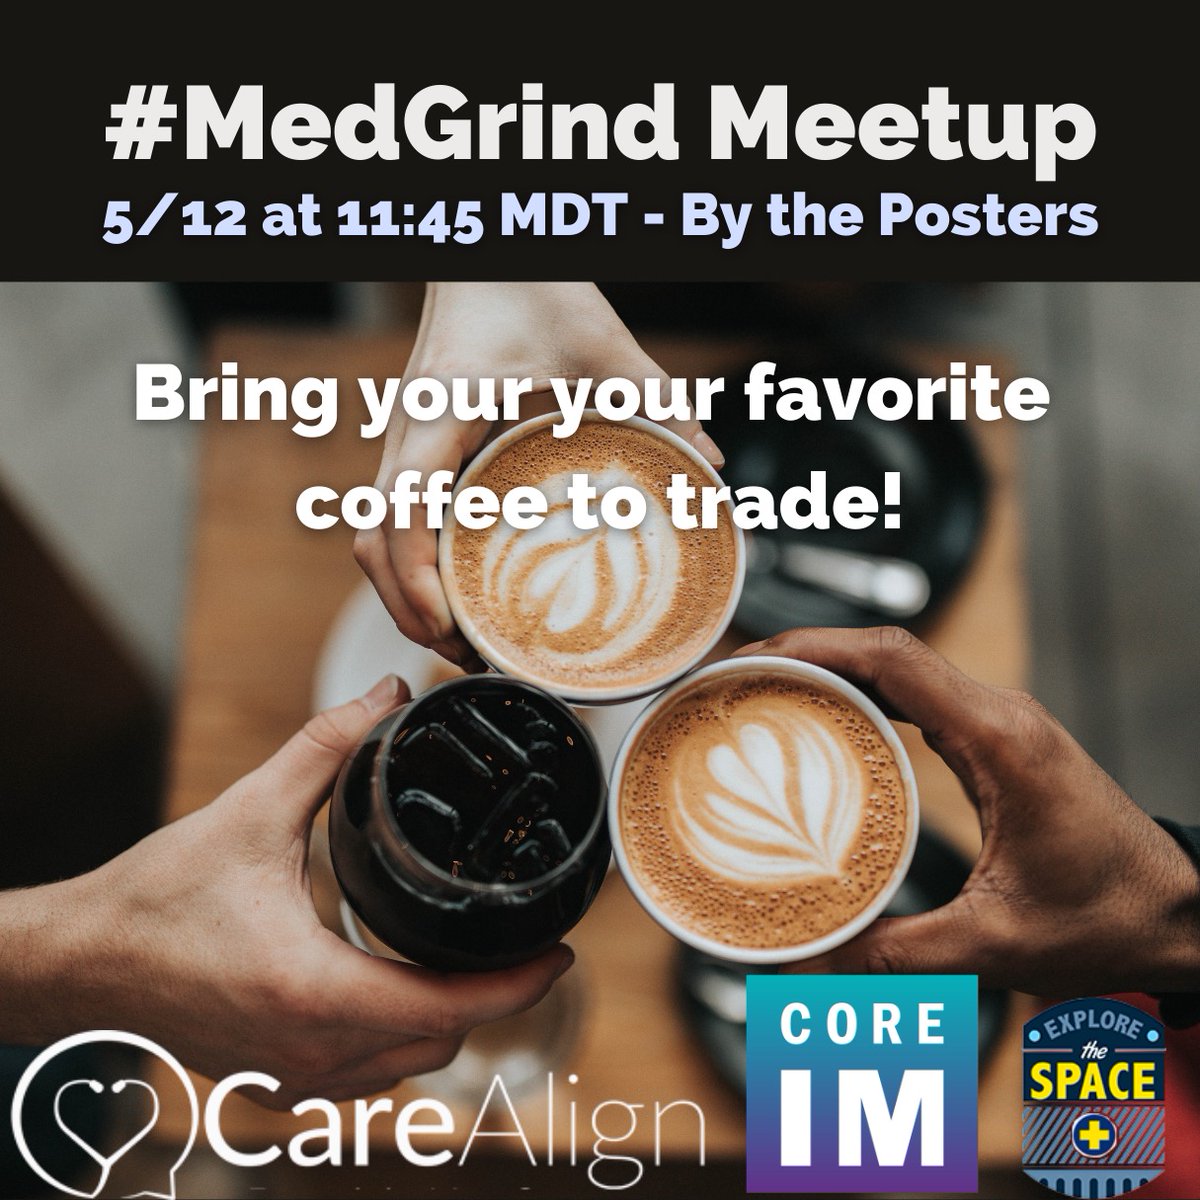 #MedGrind Meet up #Tweetup 
@ #SGIM23 Friday at 11:45A

These are so much fun! We trade coffee (or tea, dog biscuits or hugs), make friends, take selfies, hang out together!